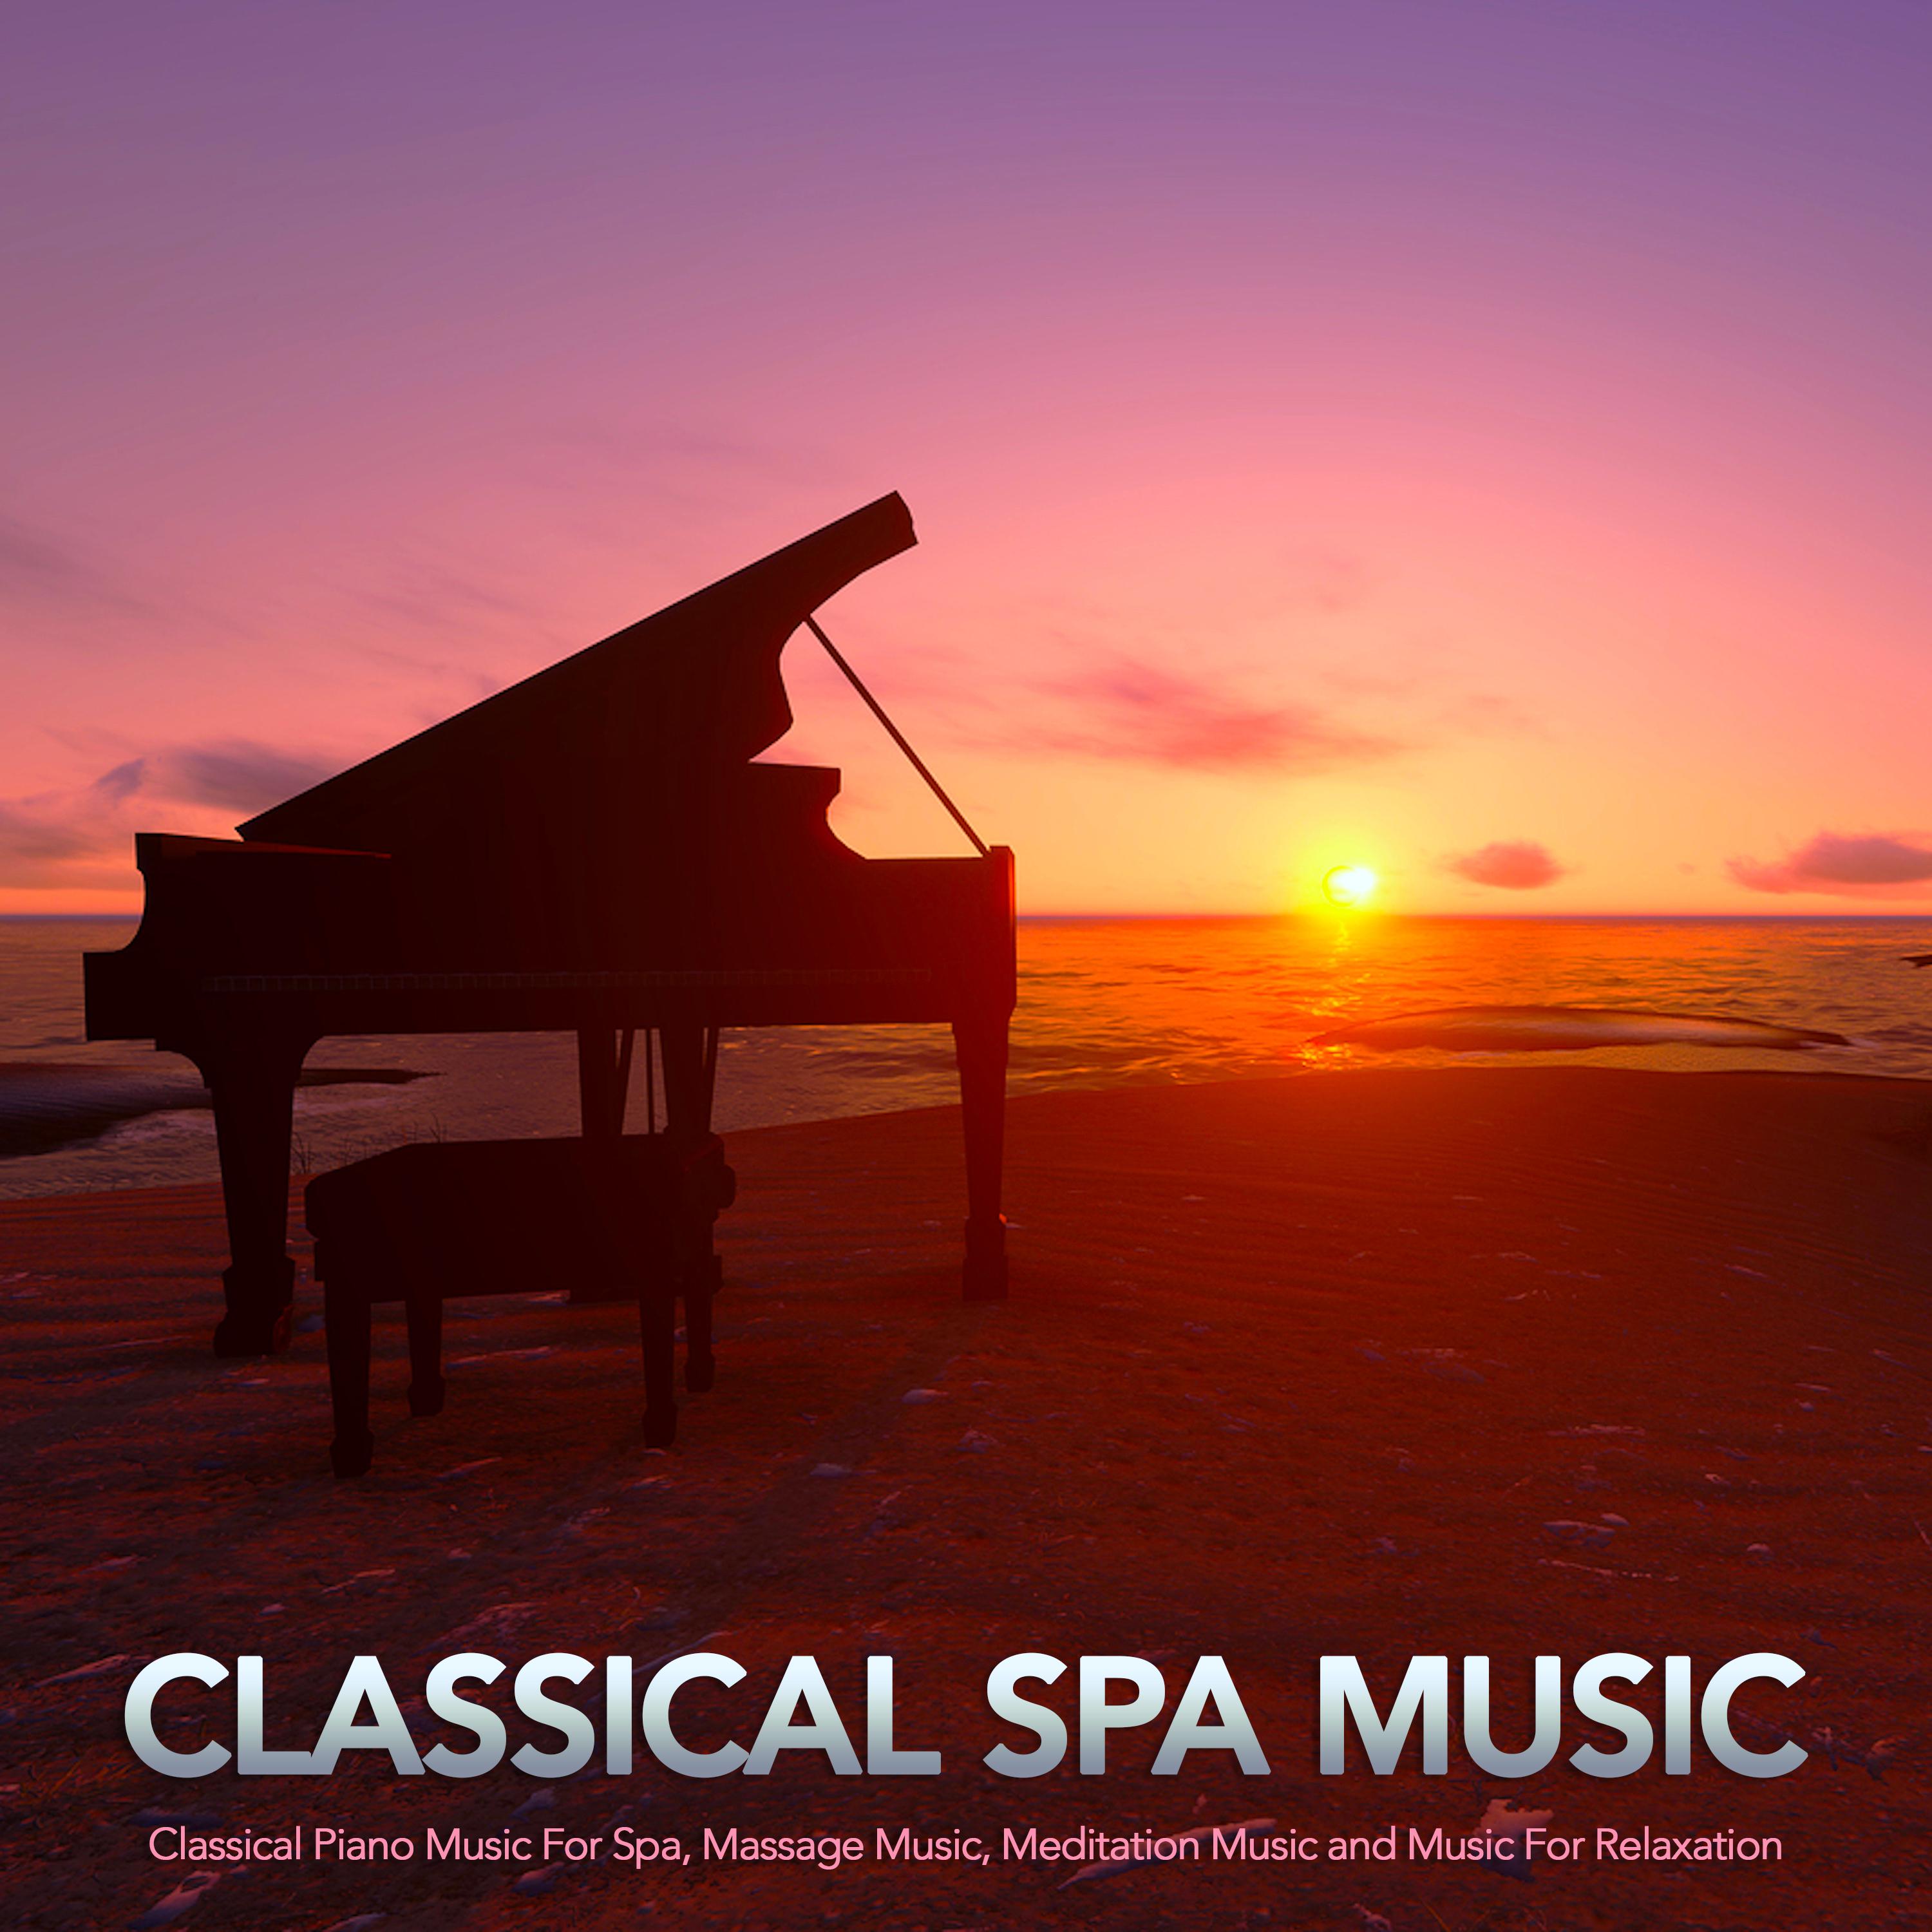 Tale of Distant Lands - Schumann - Classical Piano Music - Spa Music